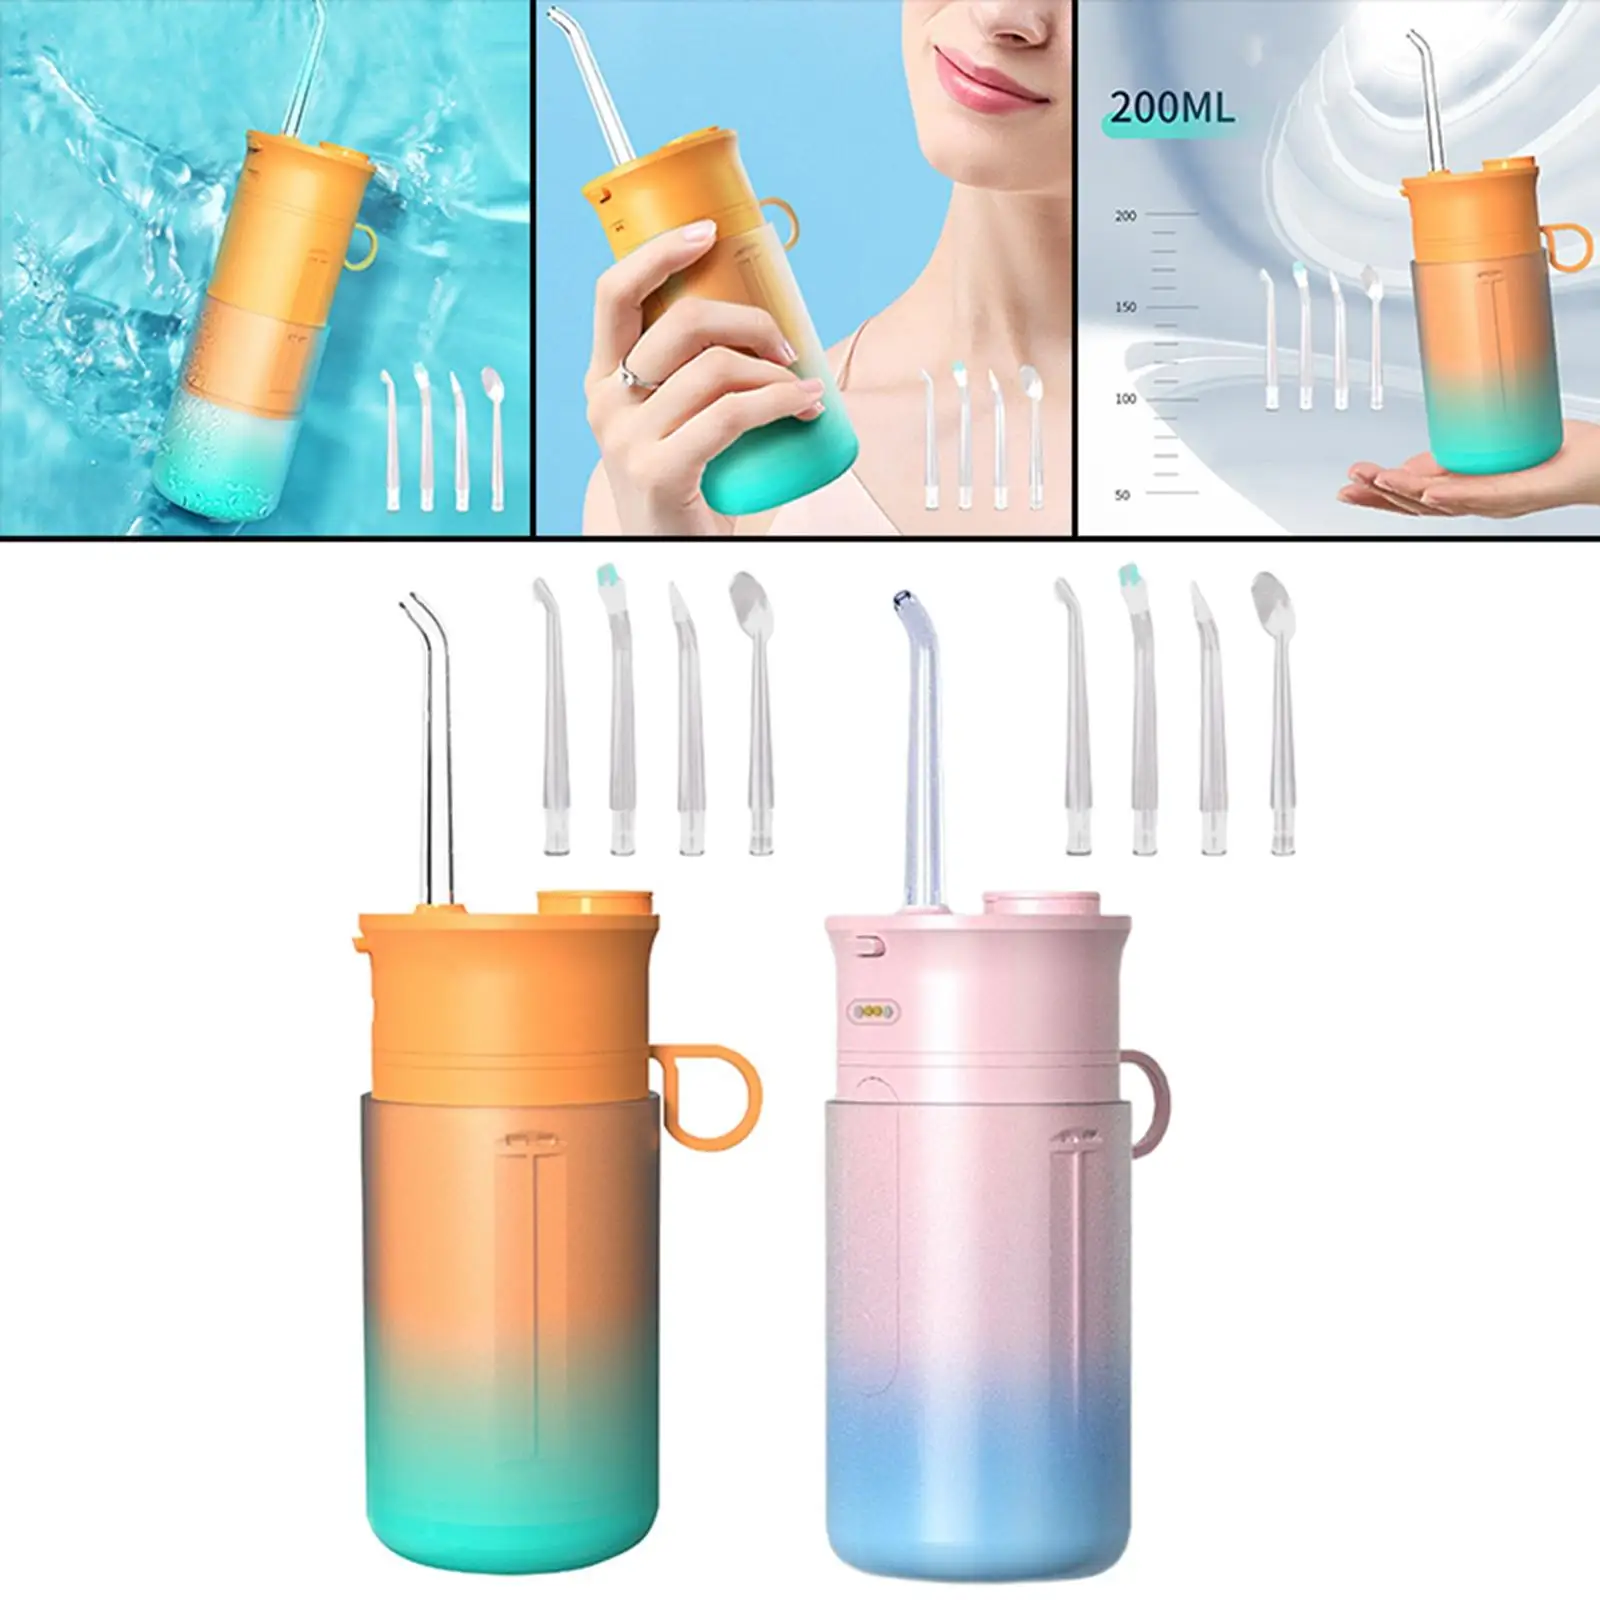 Cordless Oral Irrigator IPX7 Electric Flosser with 3 Modes 200ml Waterproof Rechargeable Telescopic for Home Use Travel